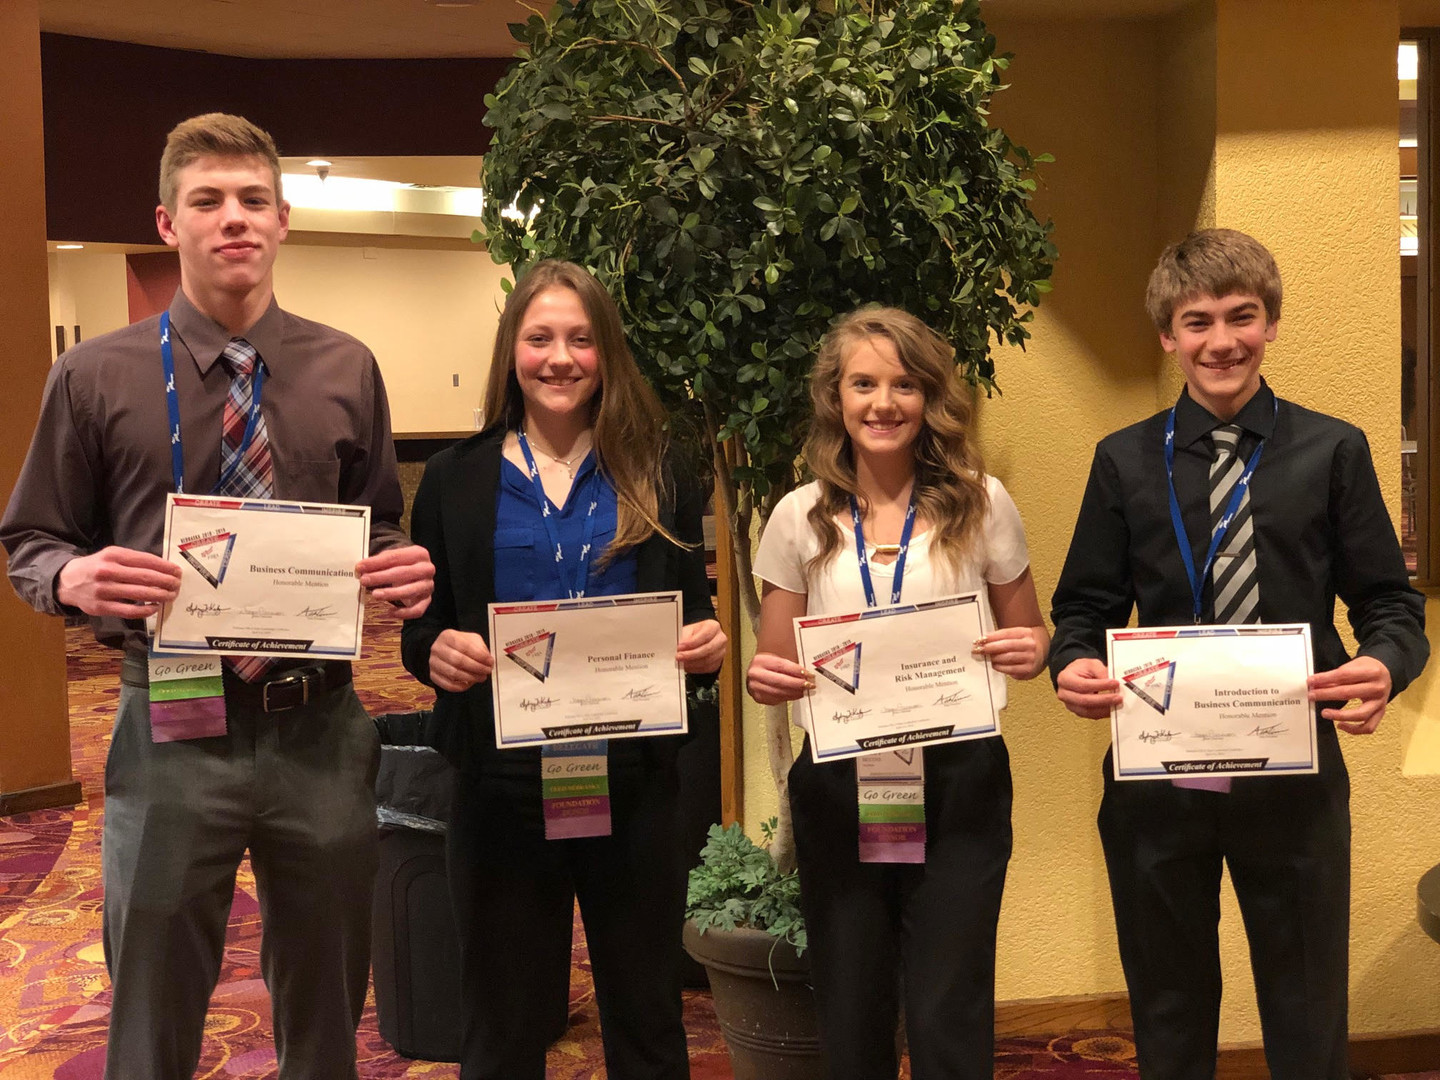 Eli Waring, Saylor Rother, Calvin Antholz and Haley Beethe (Top 4% Honorable Mention)